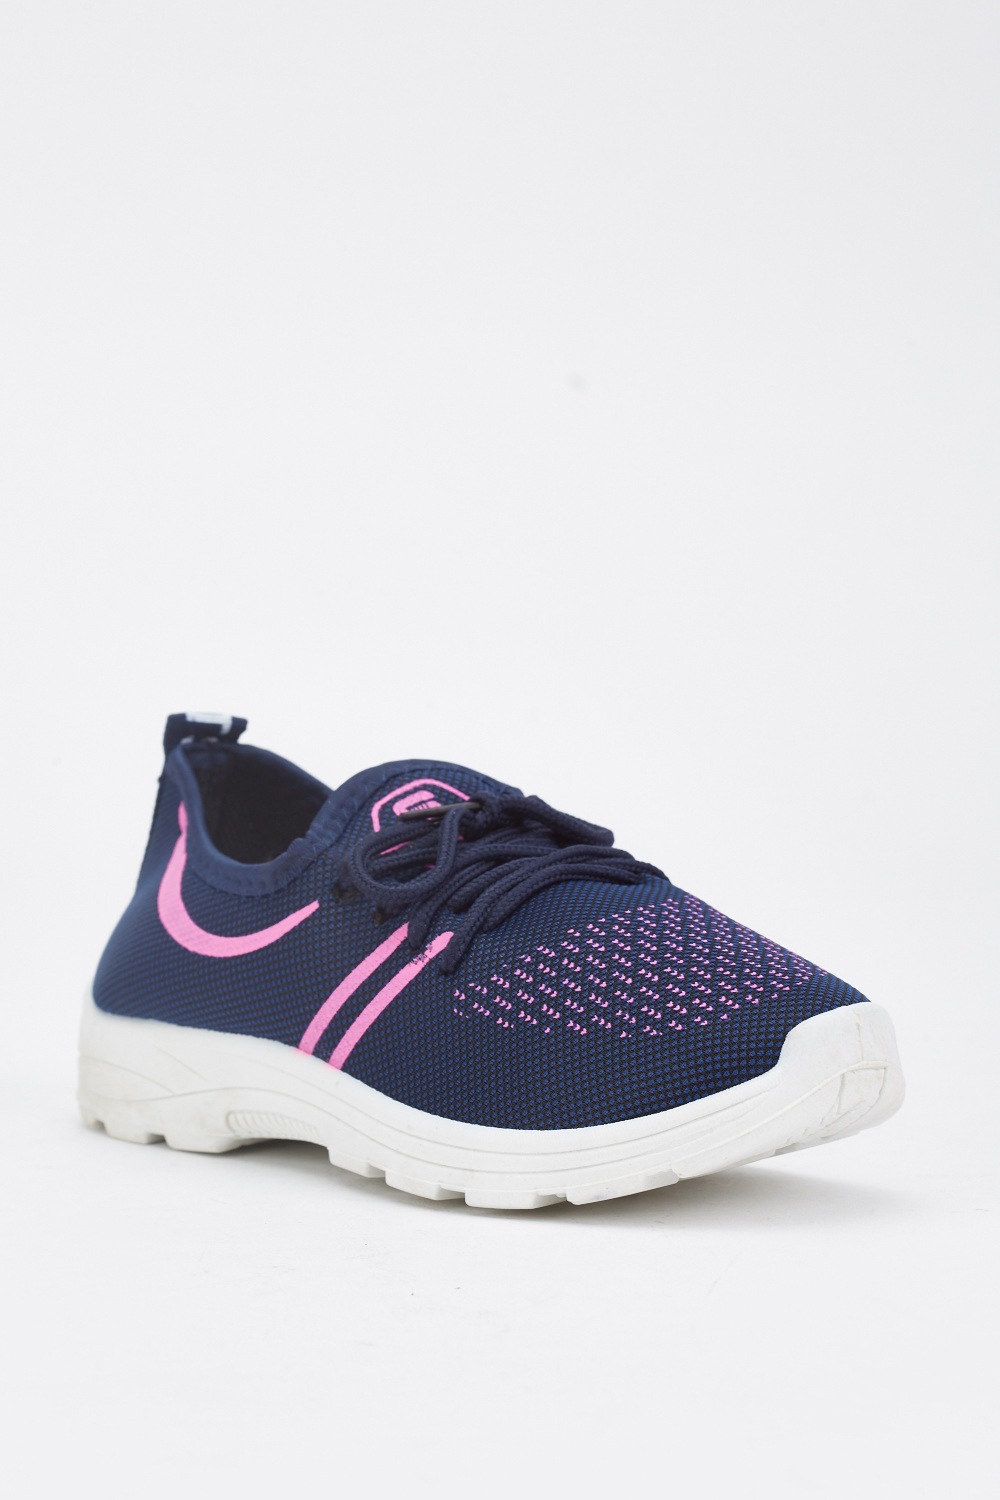 Printed Blue Trainers - Just $7